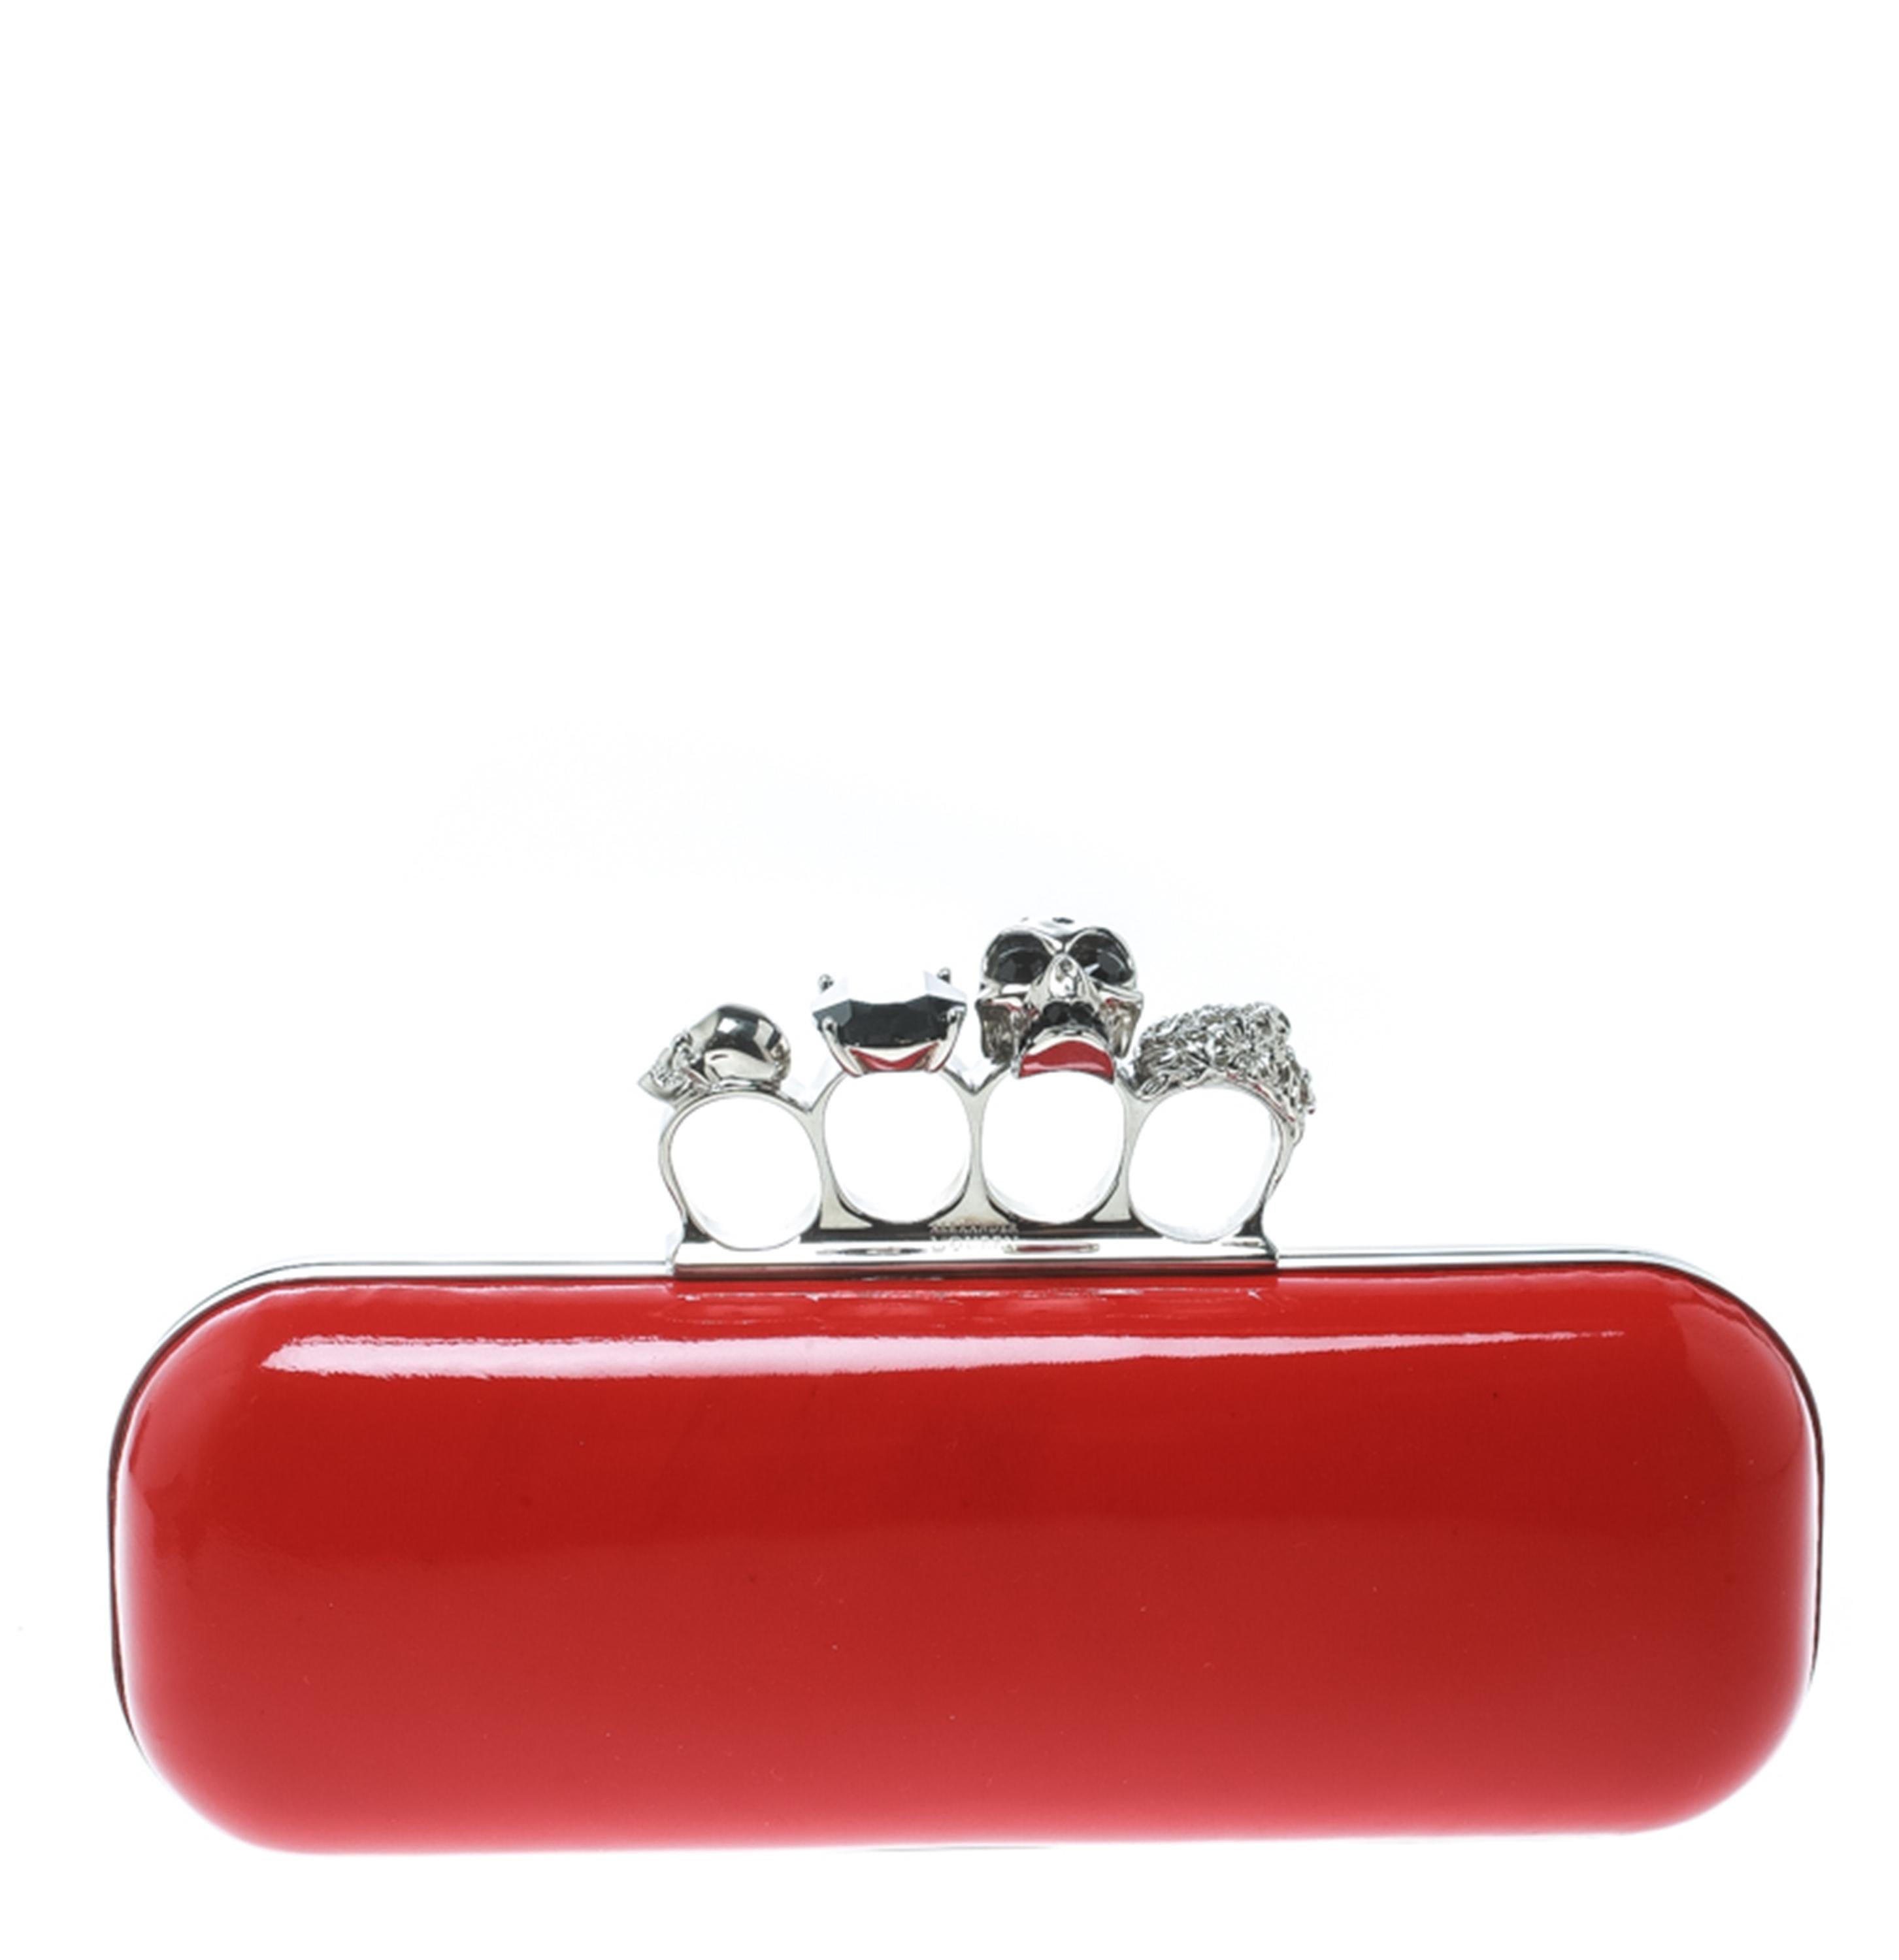 This Knuckle Clutch from Alexander McQueen exudes versatility and luxury. Lined with leather on the insides it features a red patent leather exterior. This piece is complete with the brand's iconic skull-clasp fastening. Flaunt this beauty with all